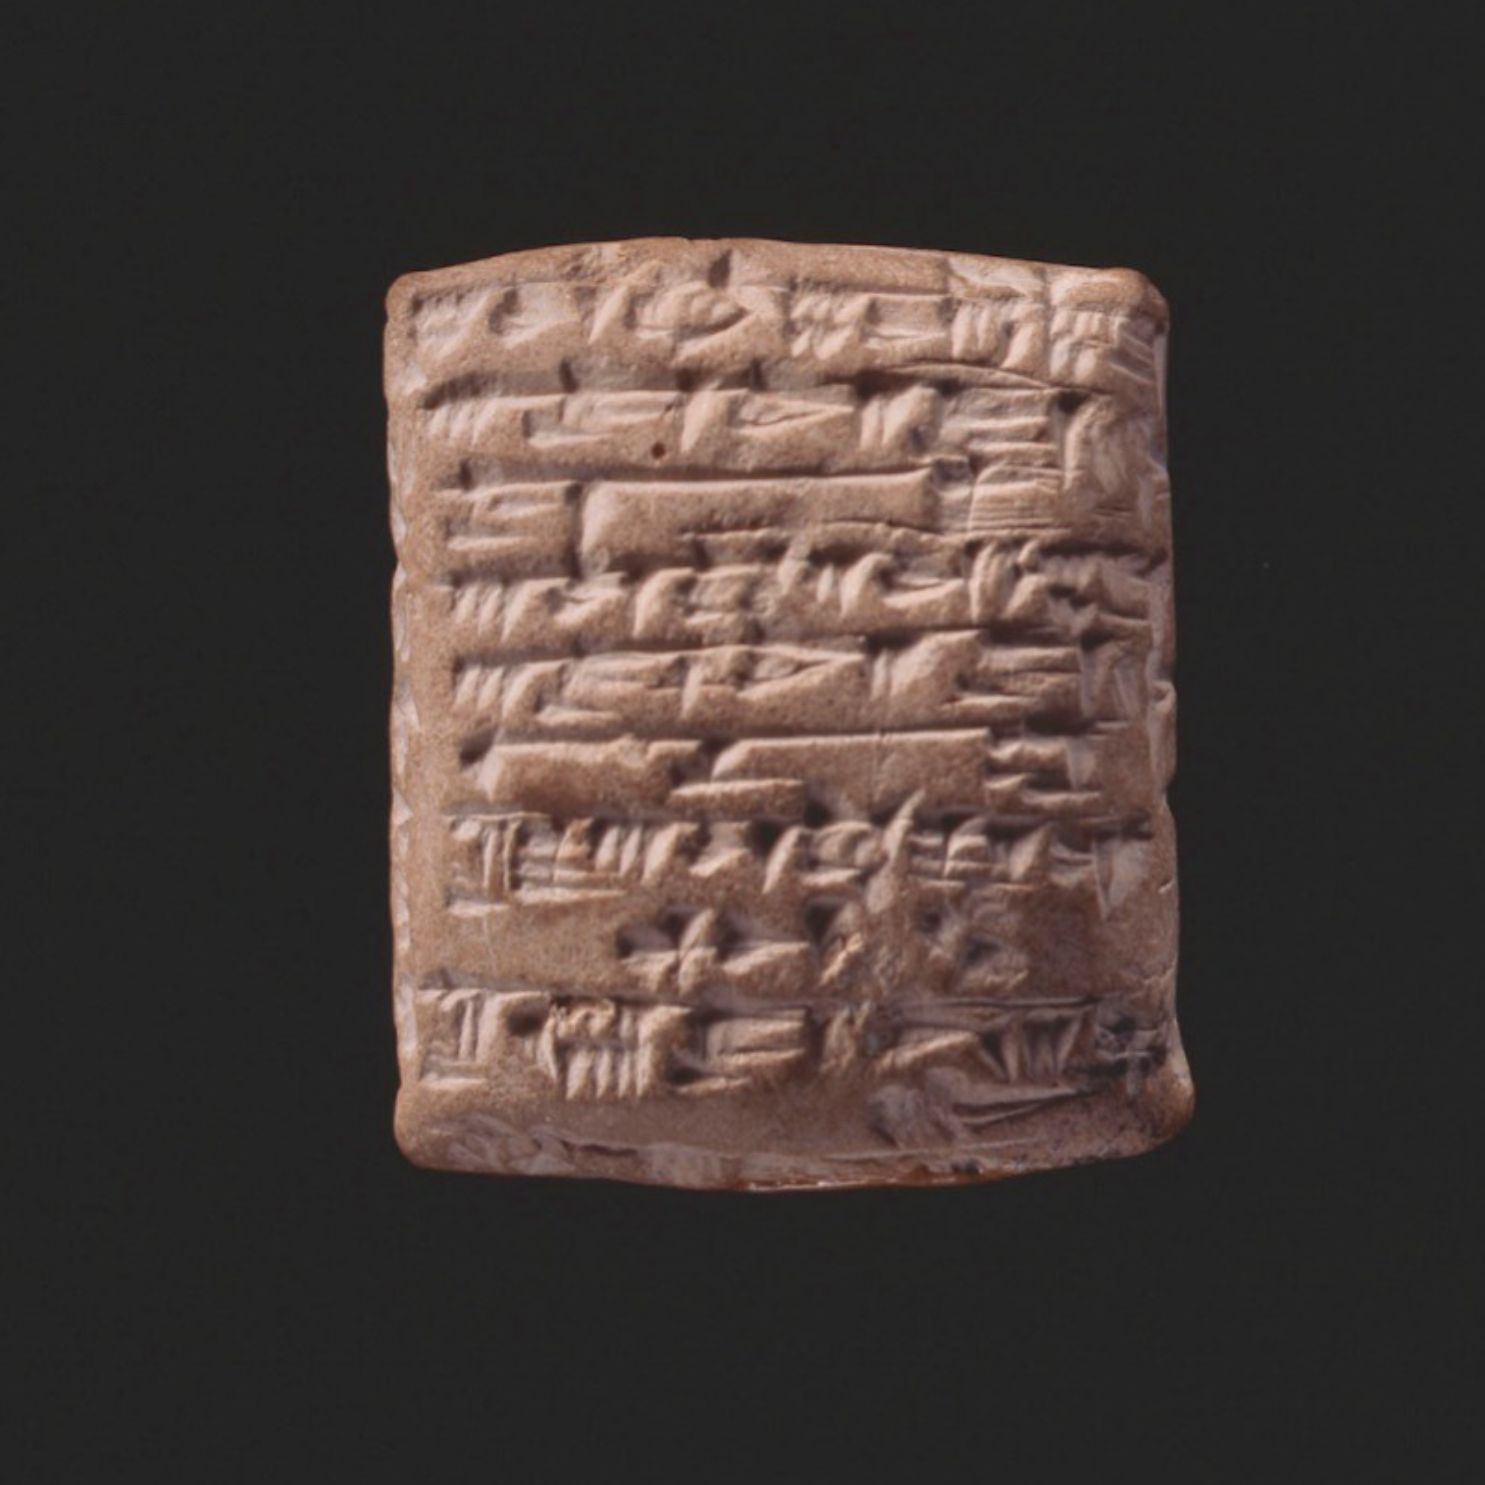 Cuneiform Tablet with Receipt of Goods to Individuals. Sumerian. Third Dynasty of Ur, reign of Amar-Sin, 2046-2038 BCE. Clay. Museum purchase. 1921.215.